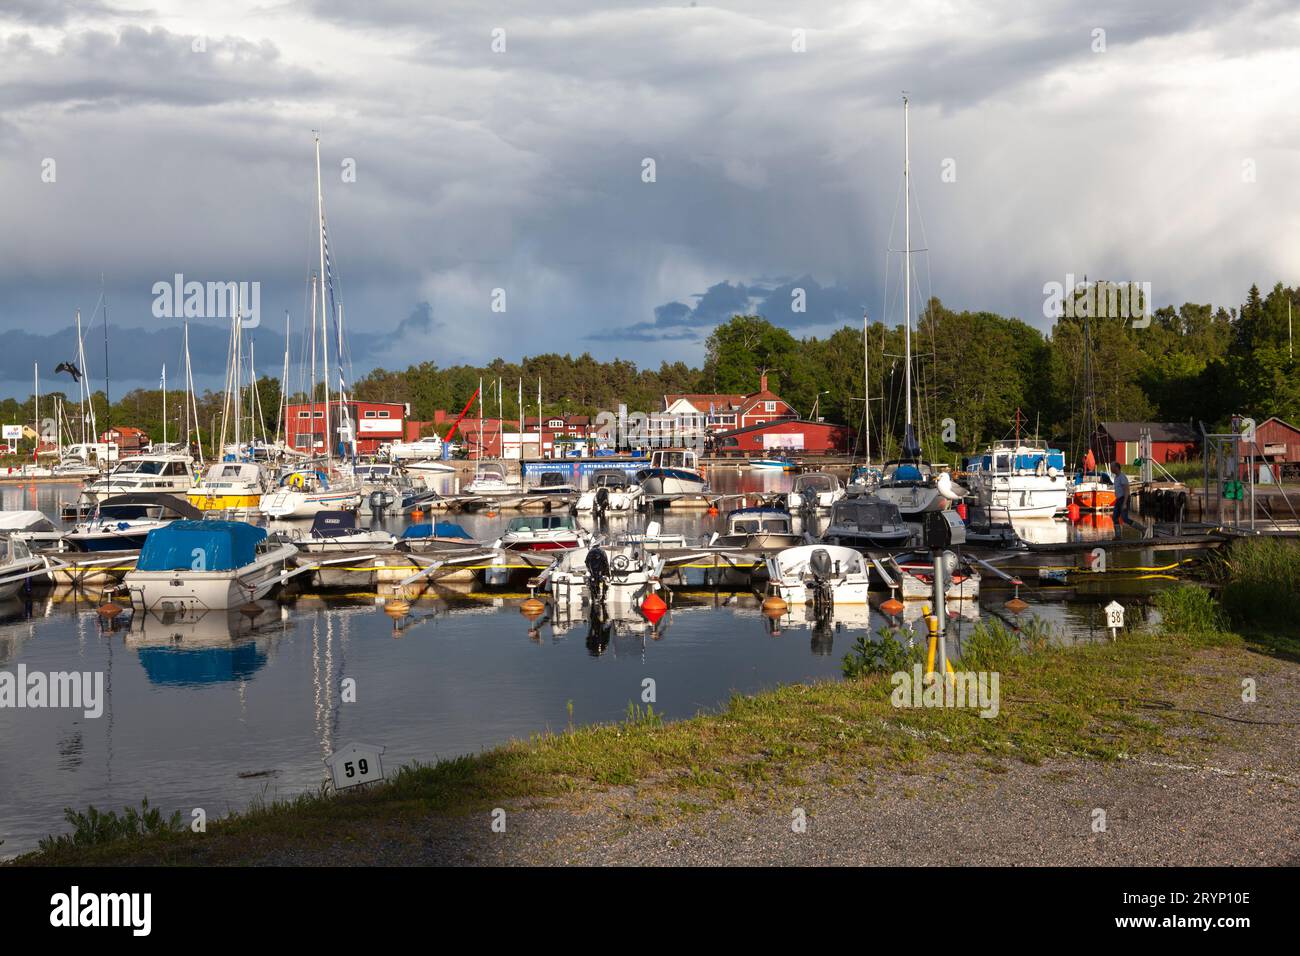 GRISSLEHAMN, SWEDEN ON 25, 2017. The marina on this side is the village by the sea. Evening, sunshine, and showers. Editorial use. Stock Photo